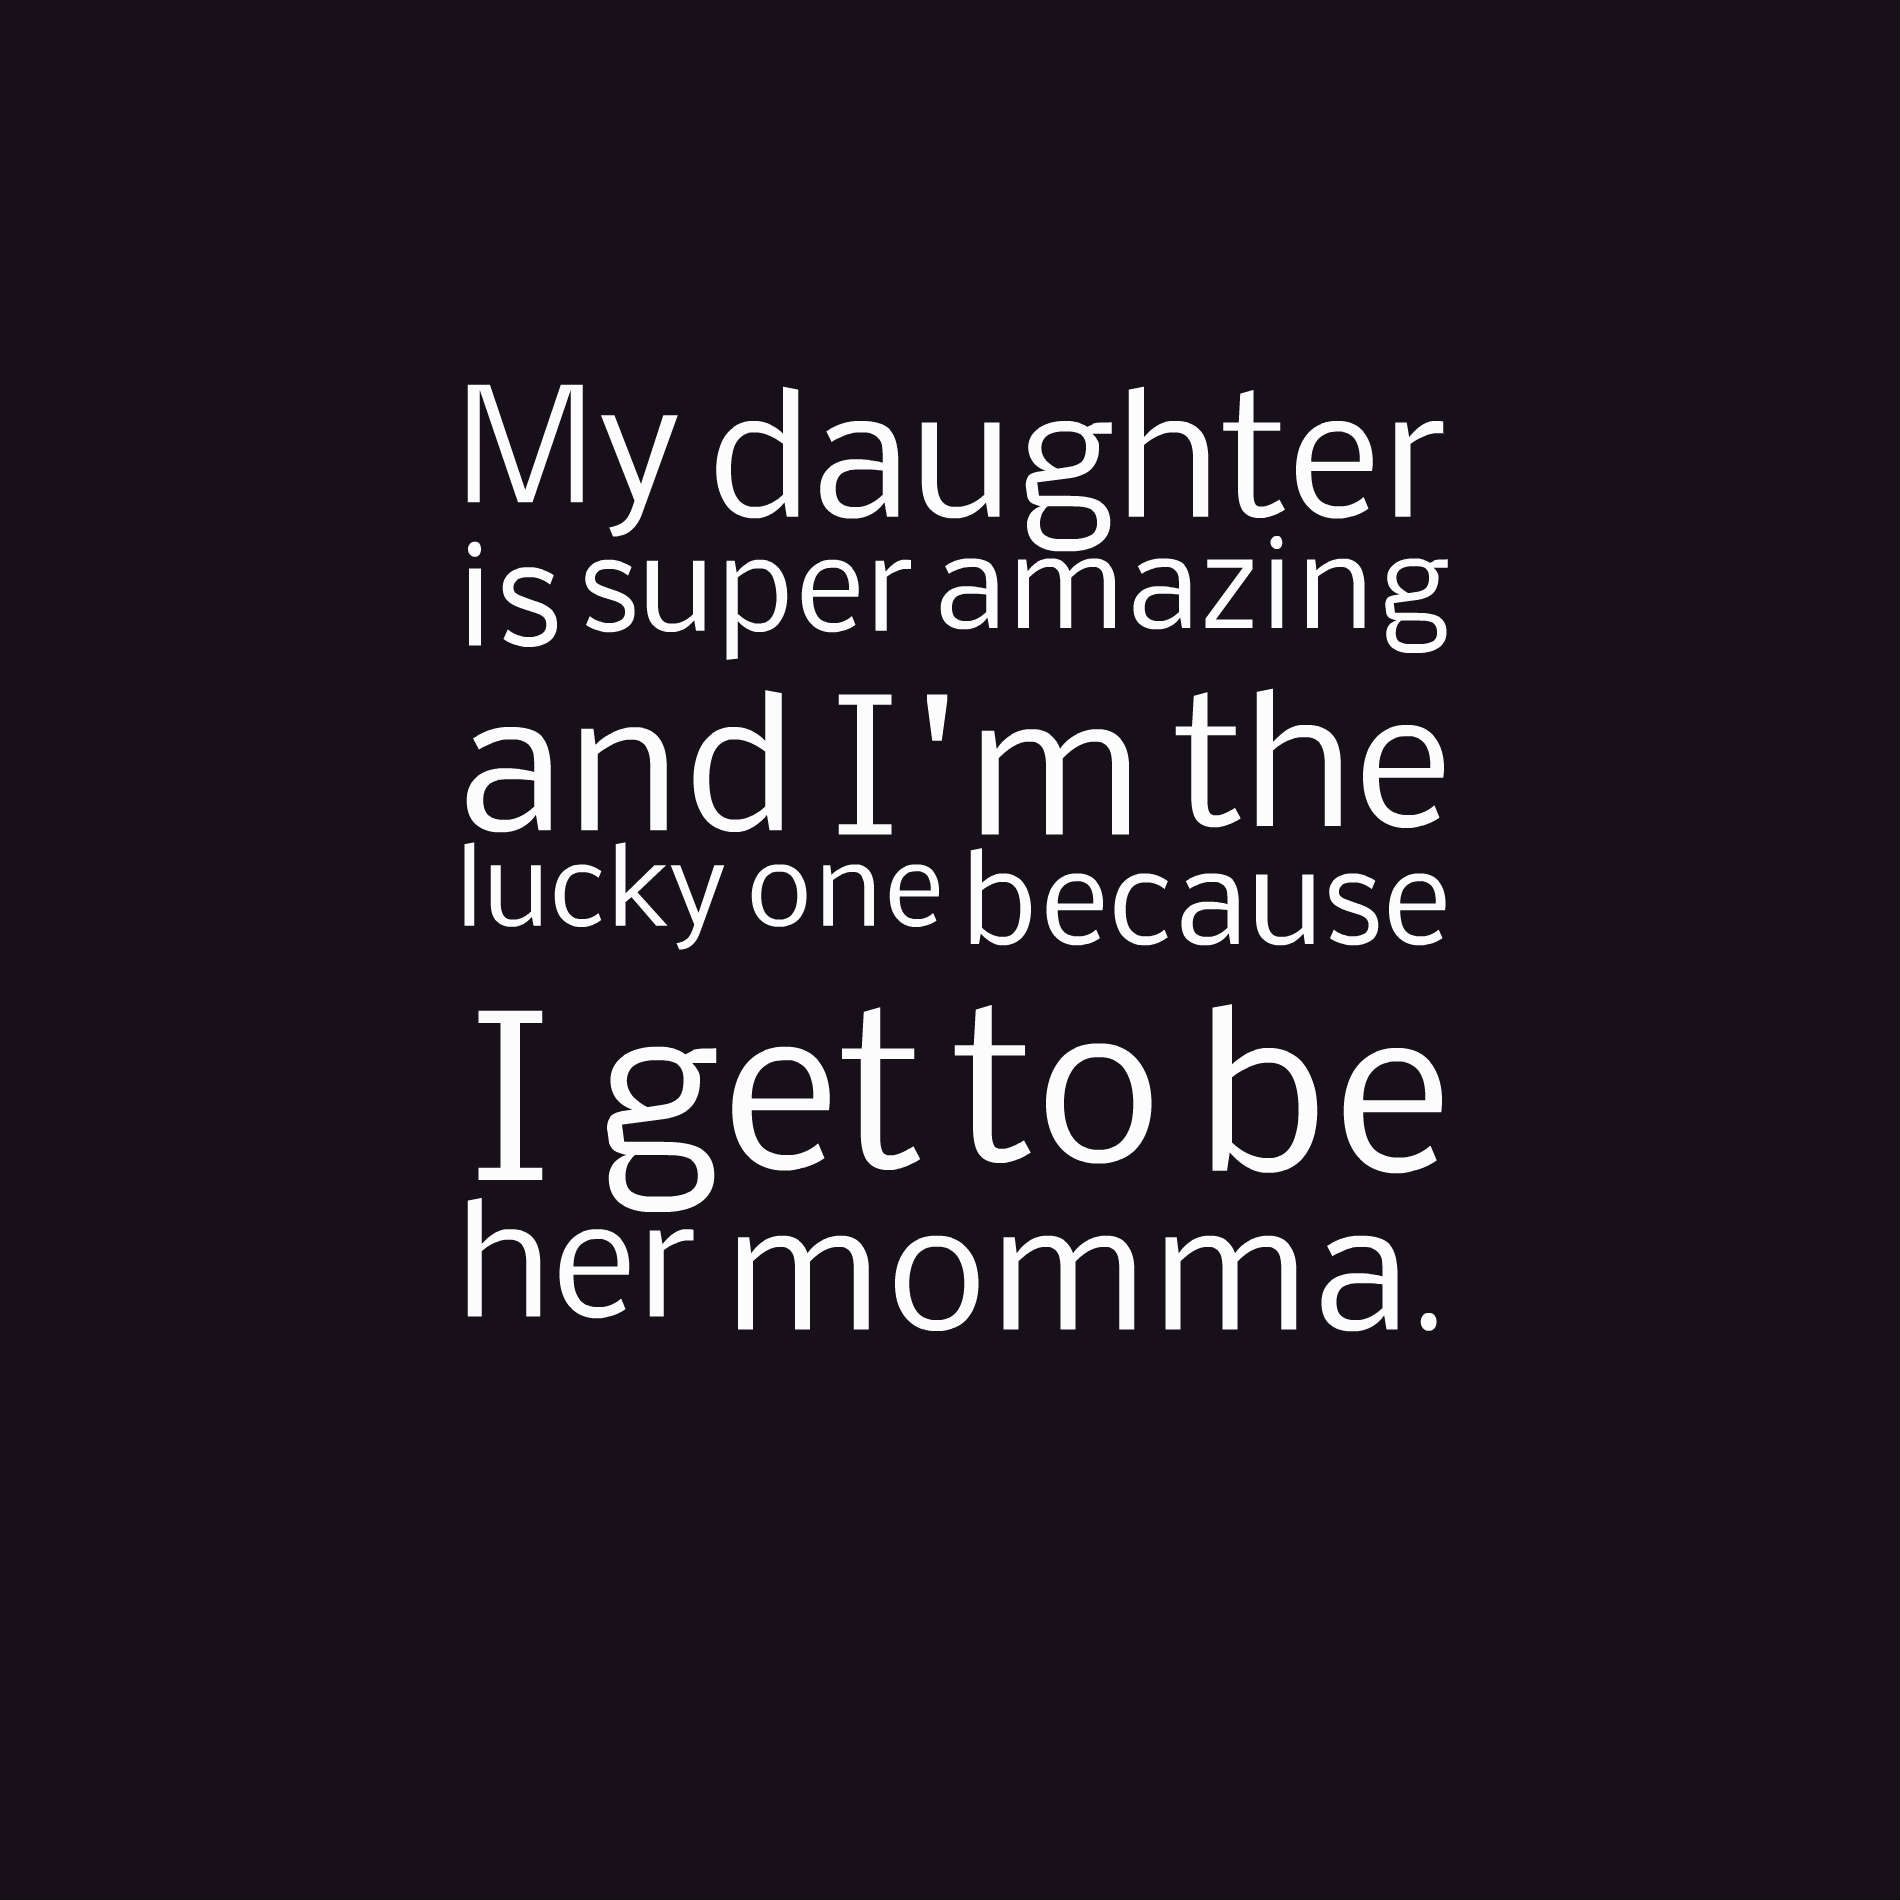 My daughter is amazing and I’m the lucky one because I get to be her momma